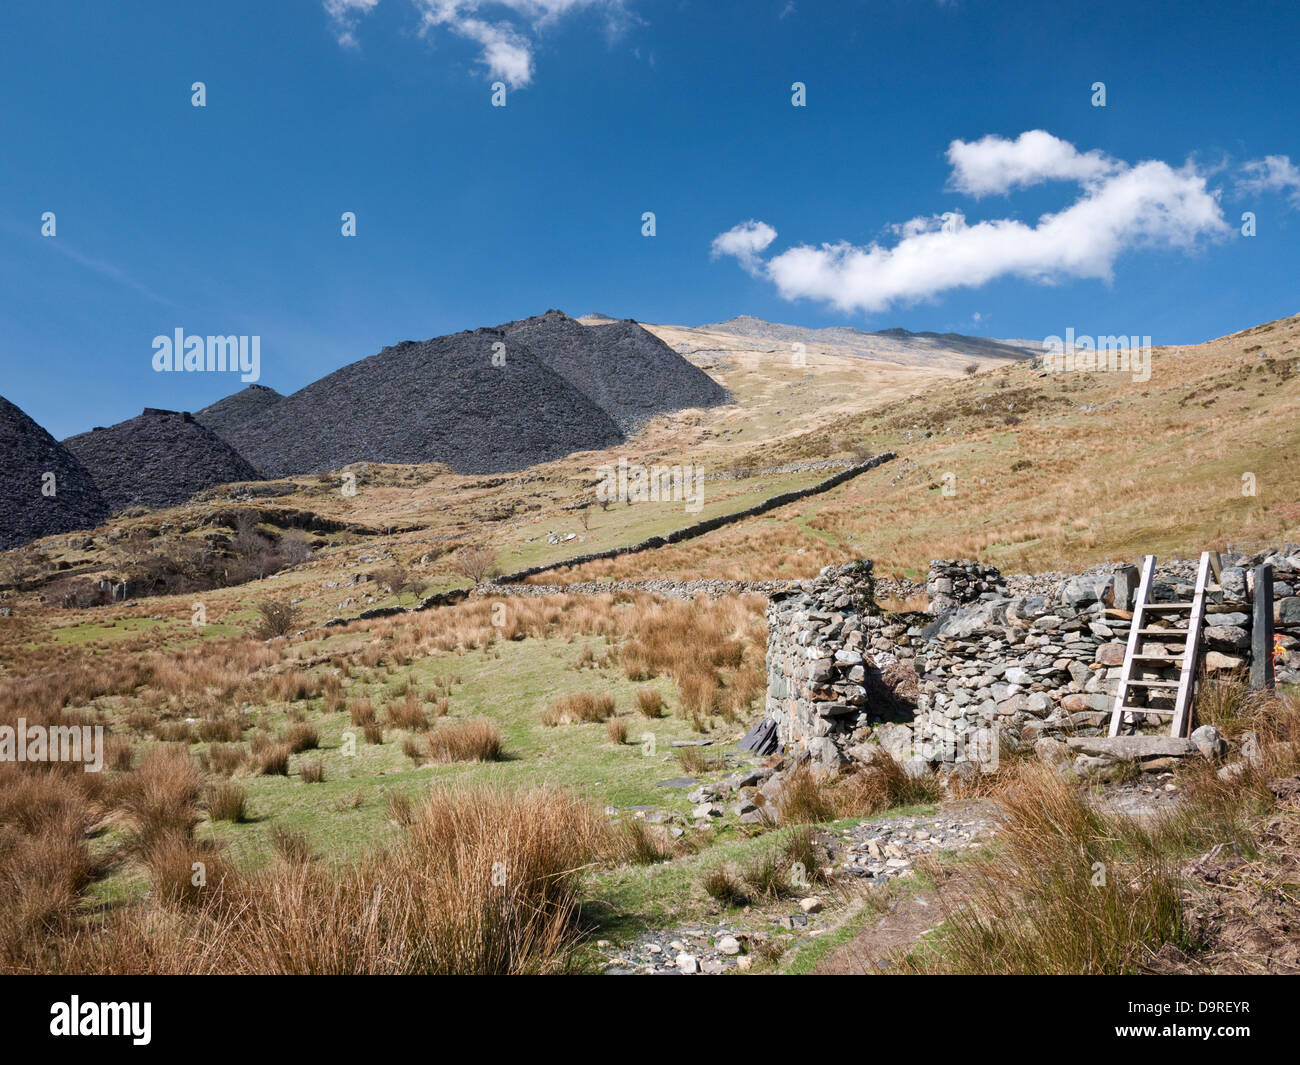 Spoil heaps from Dinorwig slate quarry scar the slopes of Elidir Fawr in Nant Peris, near the village of Llanberis in Snowdonia. Stock Photo